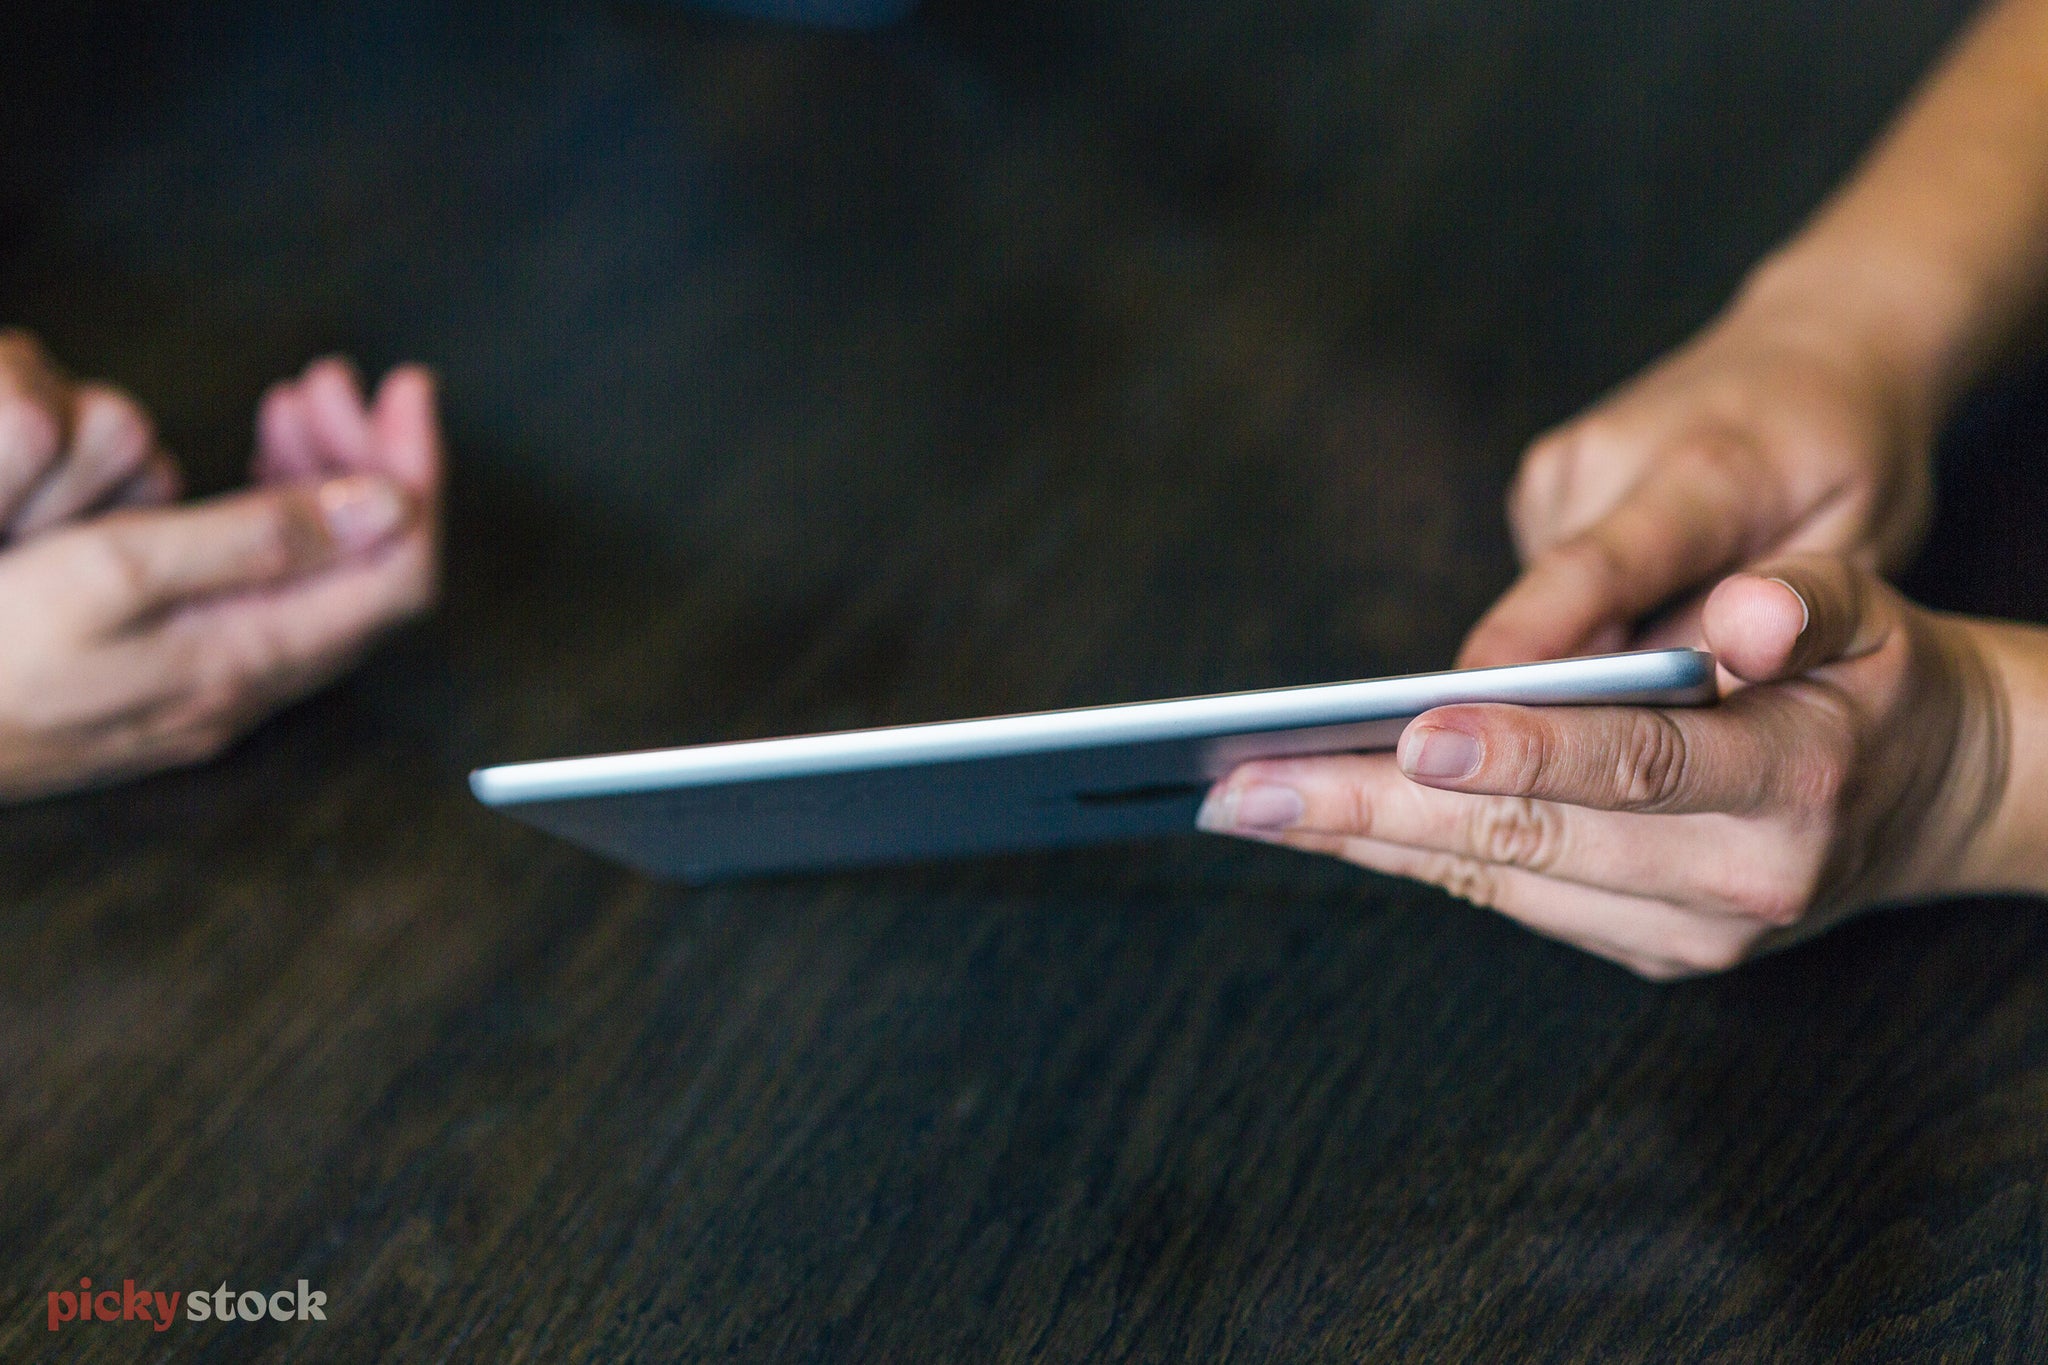 Close up of hands holding iPad or other tablet device. Another hand points, showing the holder what to do.